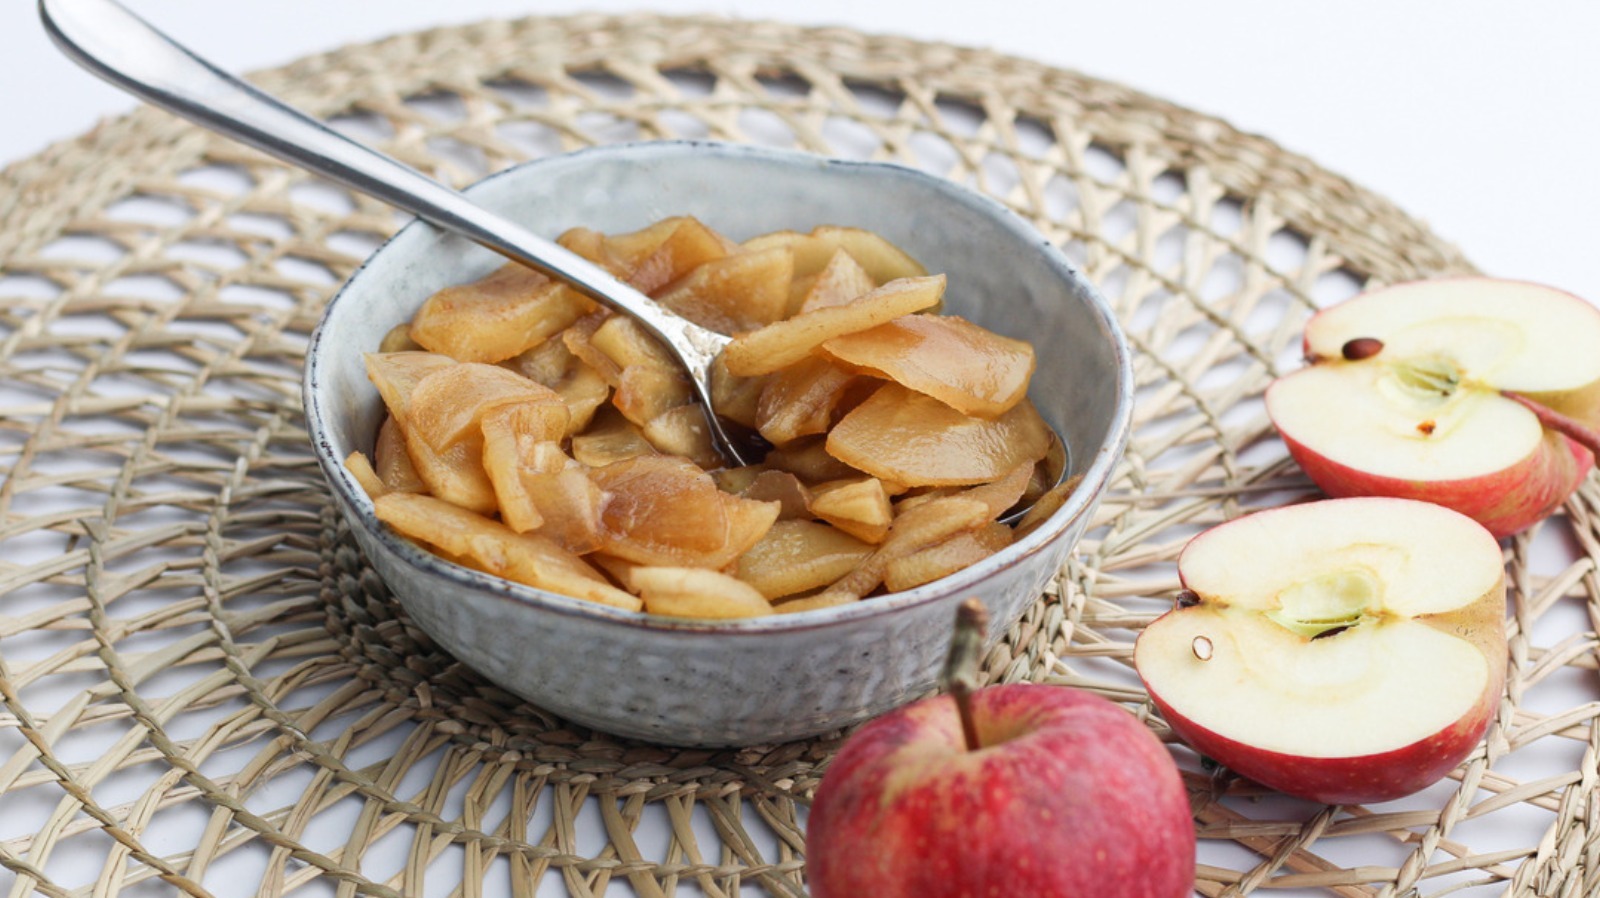 https://www.mashed.com/img/gallery/microwave-baked-apples-recipe/l-intro-1634239283.jpg